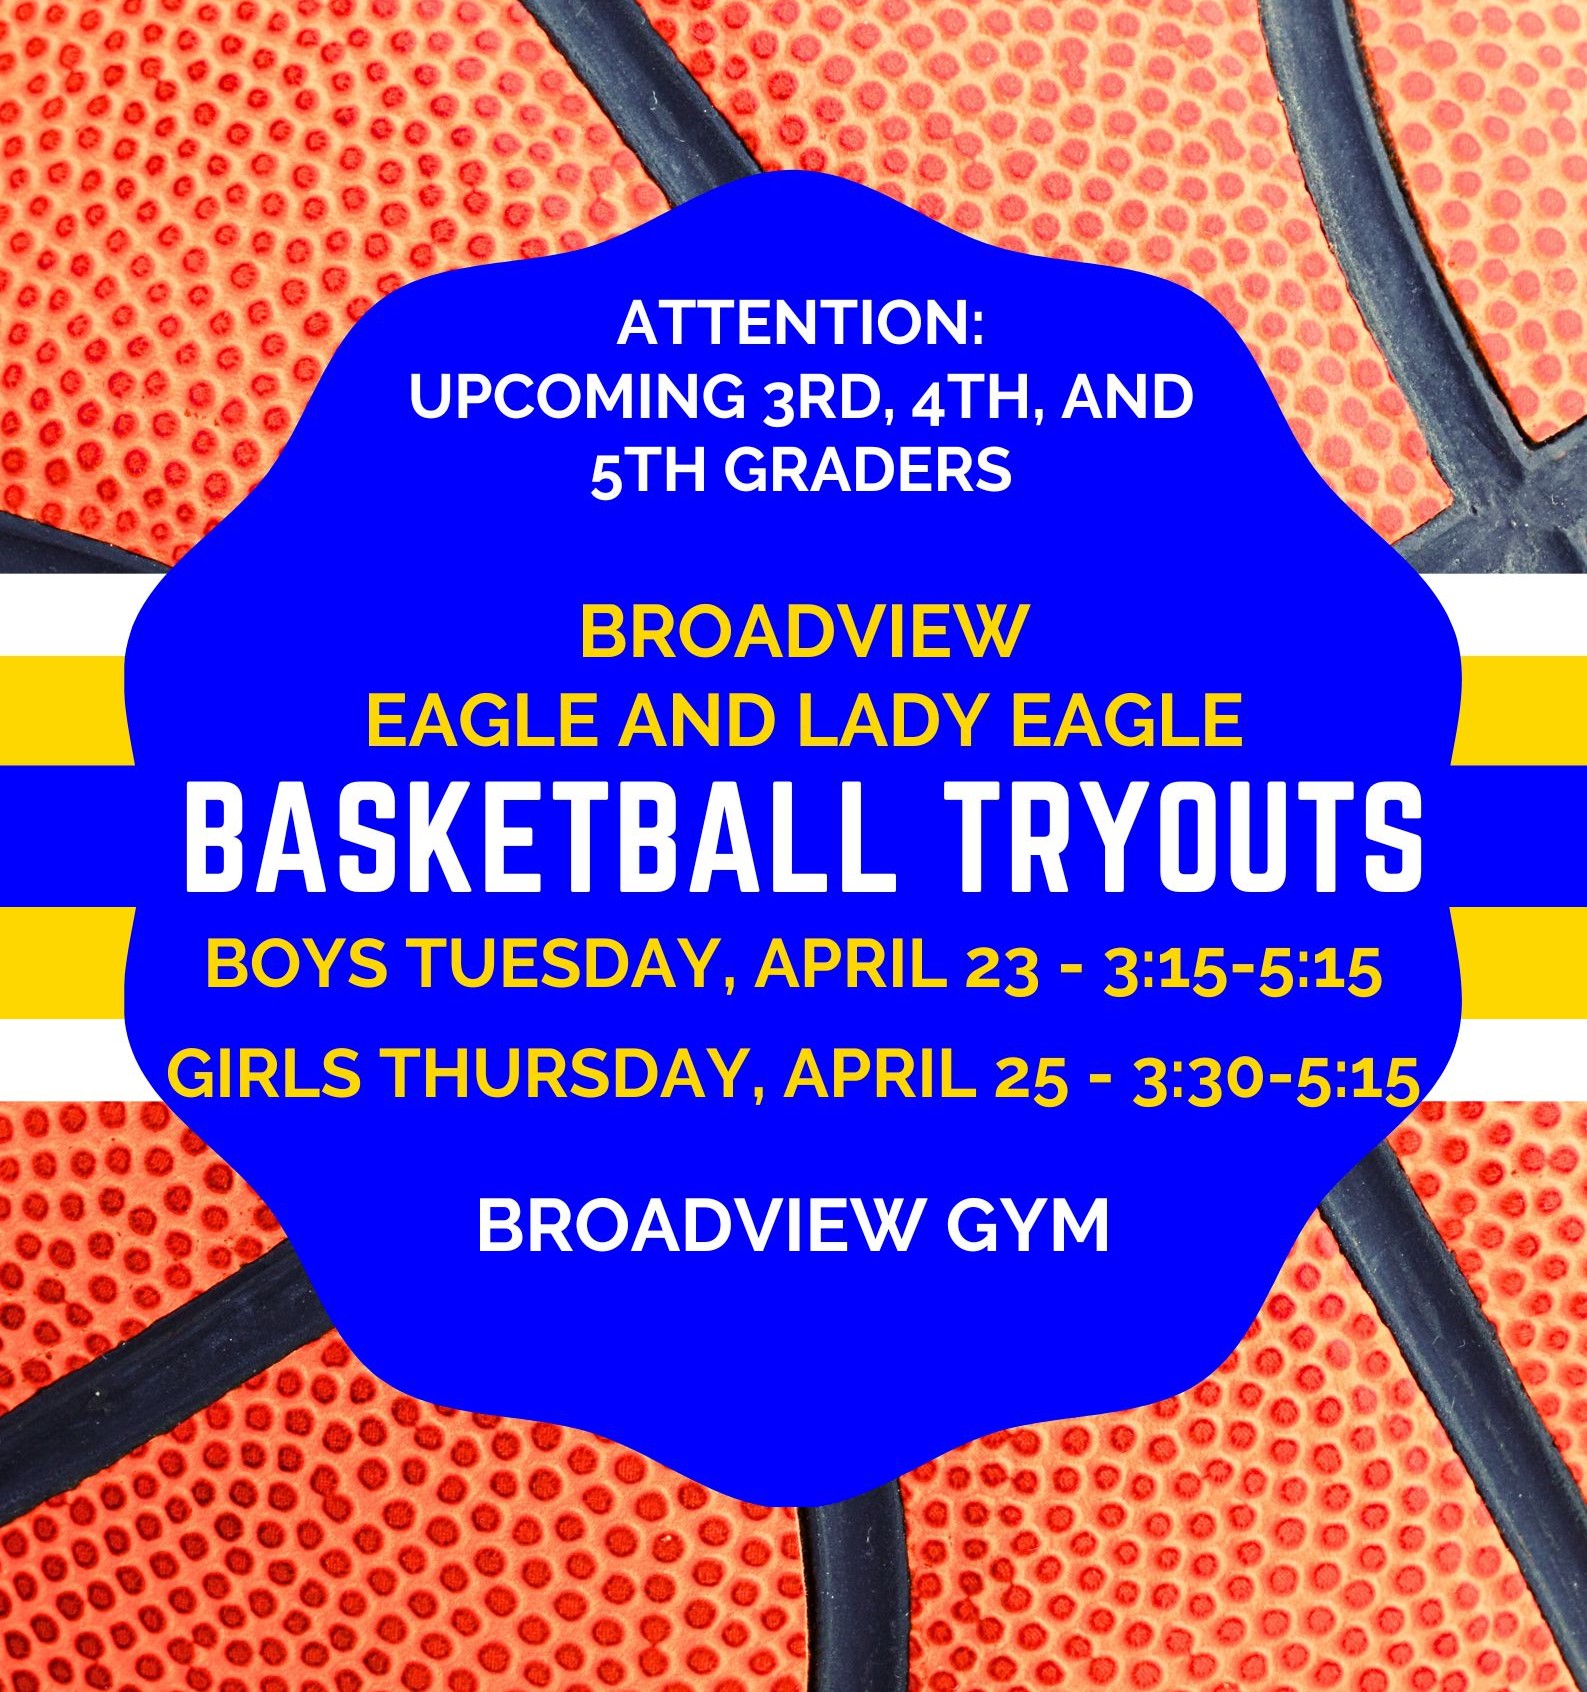 Broadview Eagle and Lady Eagle Basketball Tryouts Boys Tuesday April 23 from 3:15 to 5:00. Girls Thursday April 25 from 3:30-5:00. Both tryouts are in the Broadview Gym.